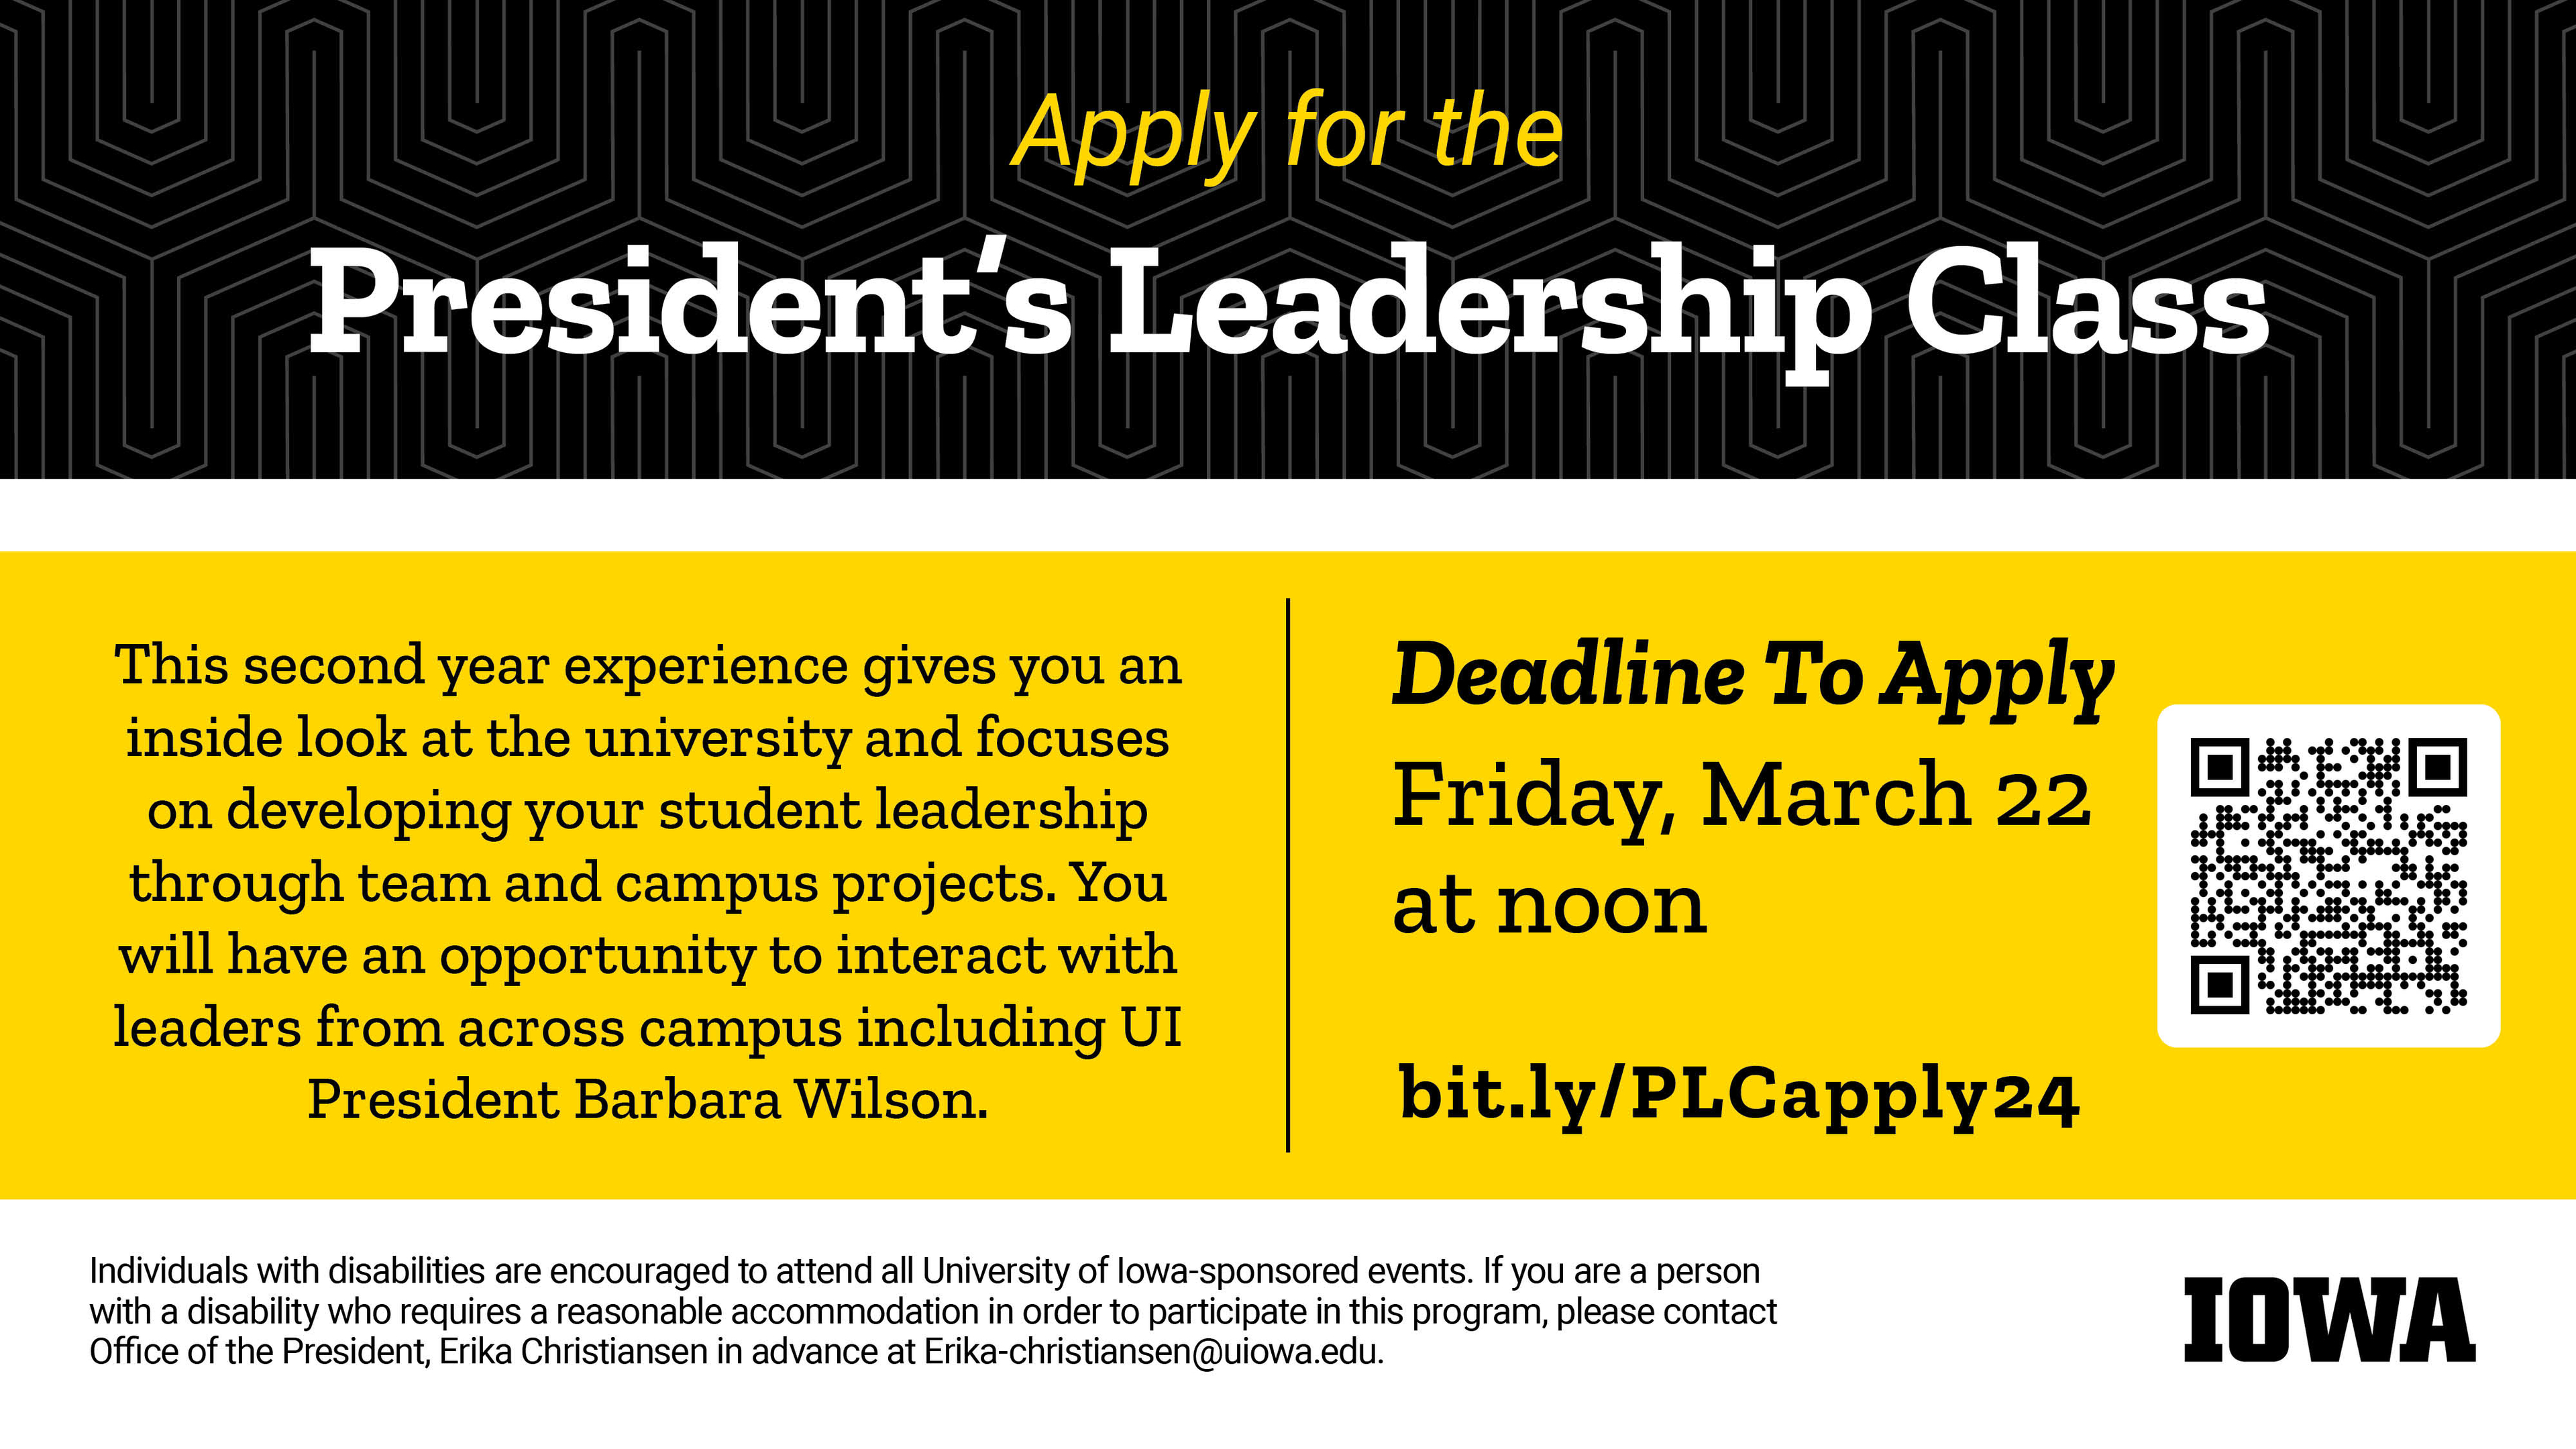 Apply to the Prsident's Leadership Class by Friday, March 22